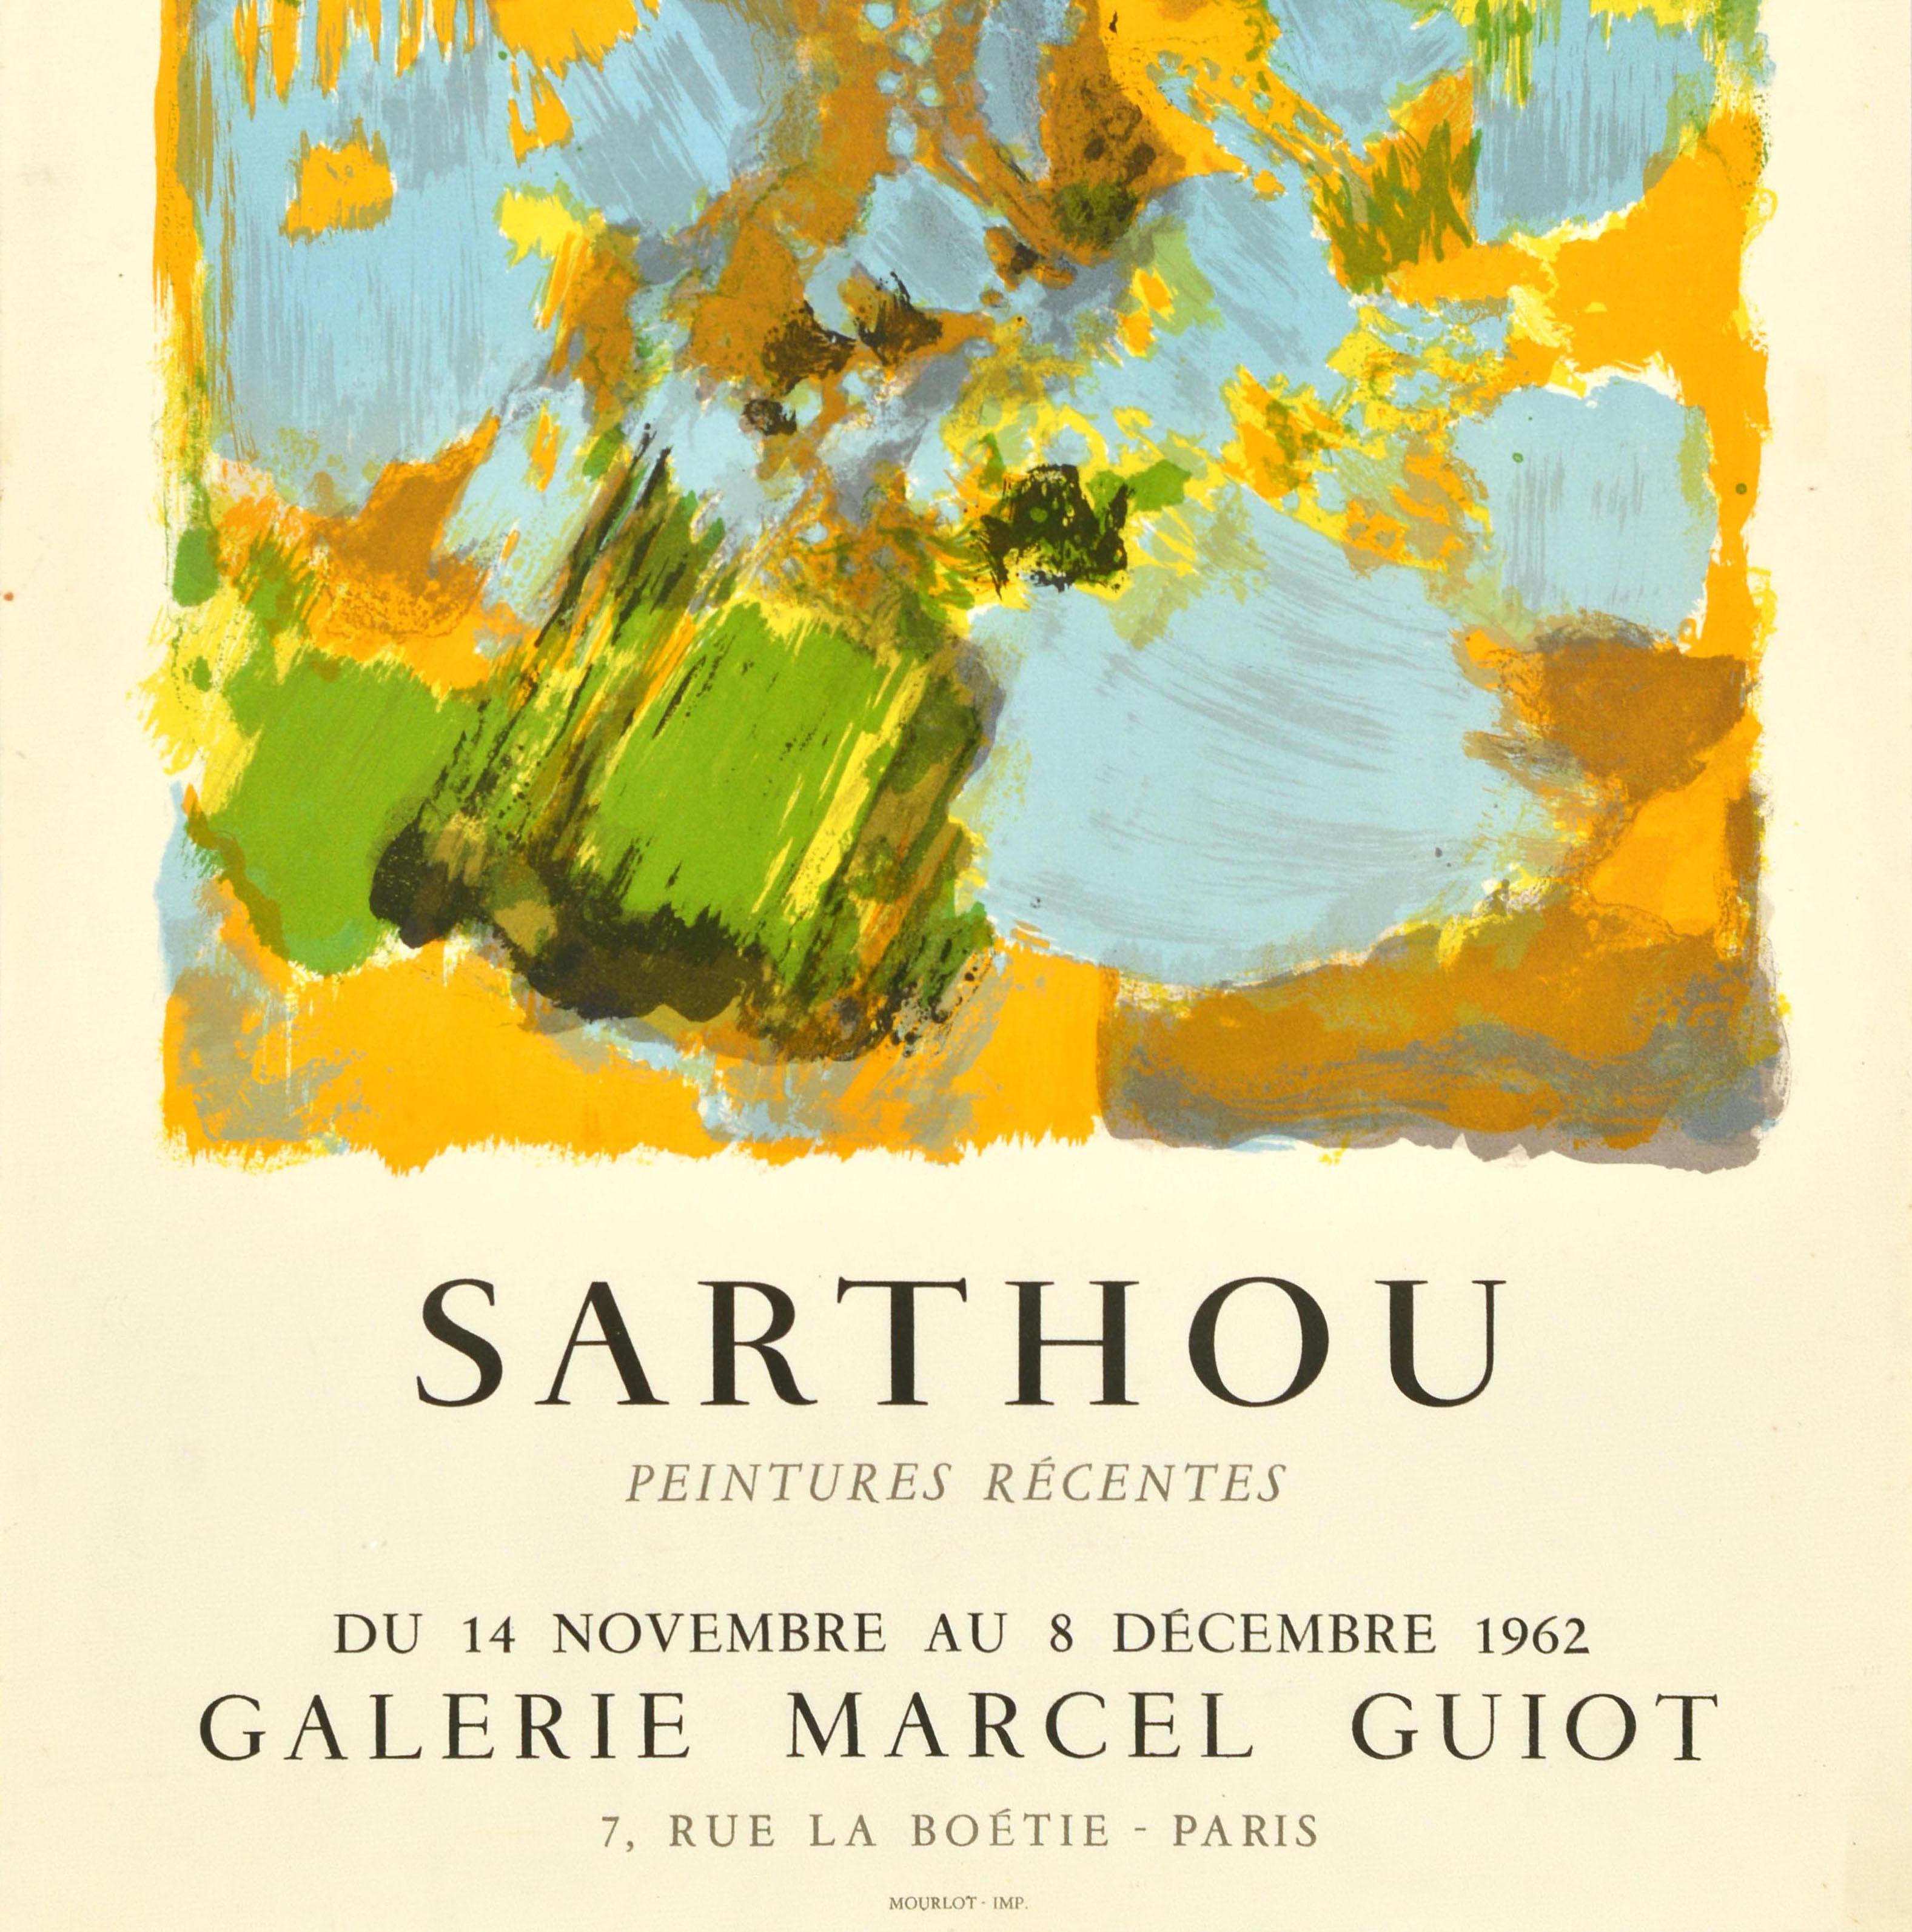 Original vintage art exhibition poster advertising Sarthou Peintures Recentes / Recent Paintings Galerie Marcel Guiot Paris held from 14 November to 8 December 1962. Colourful abstract design by the French artist Maurice Elie Sarthou (1911-1999) in